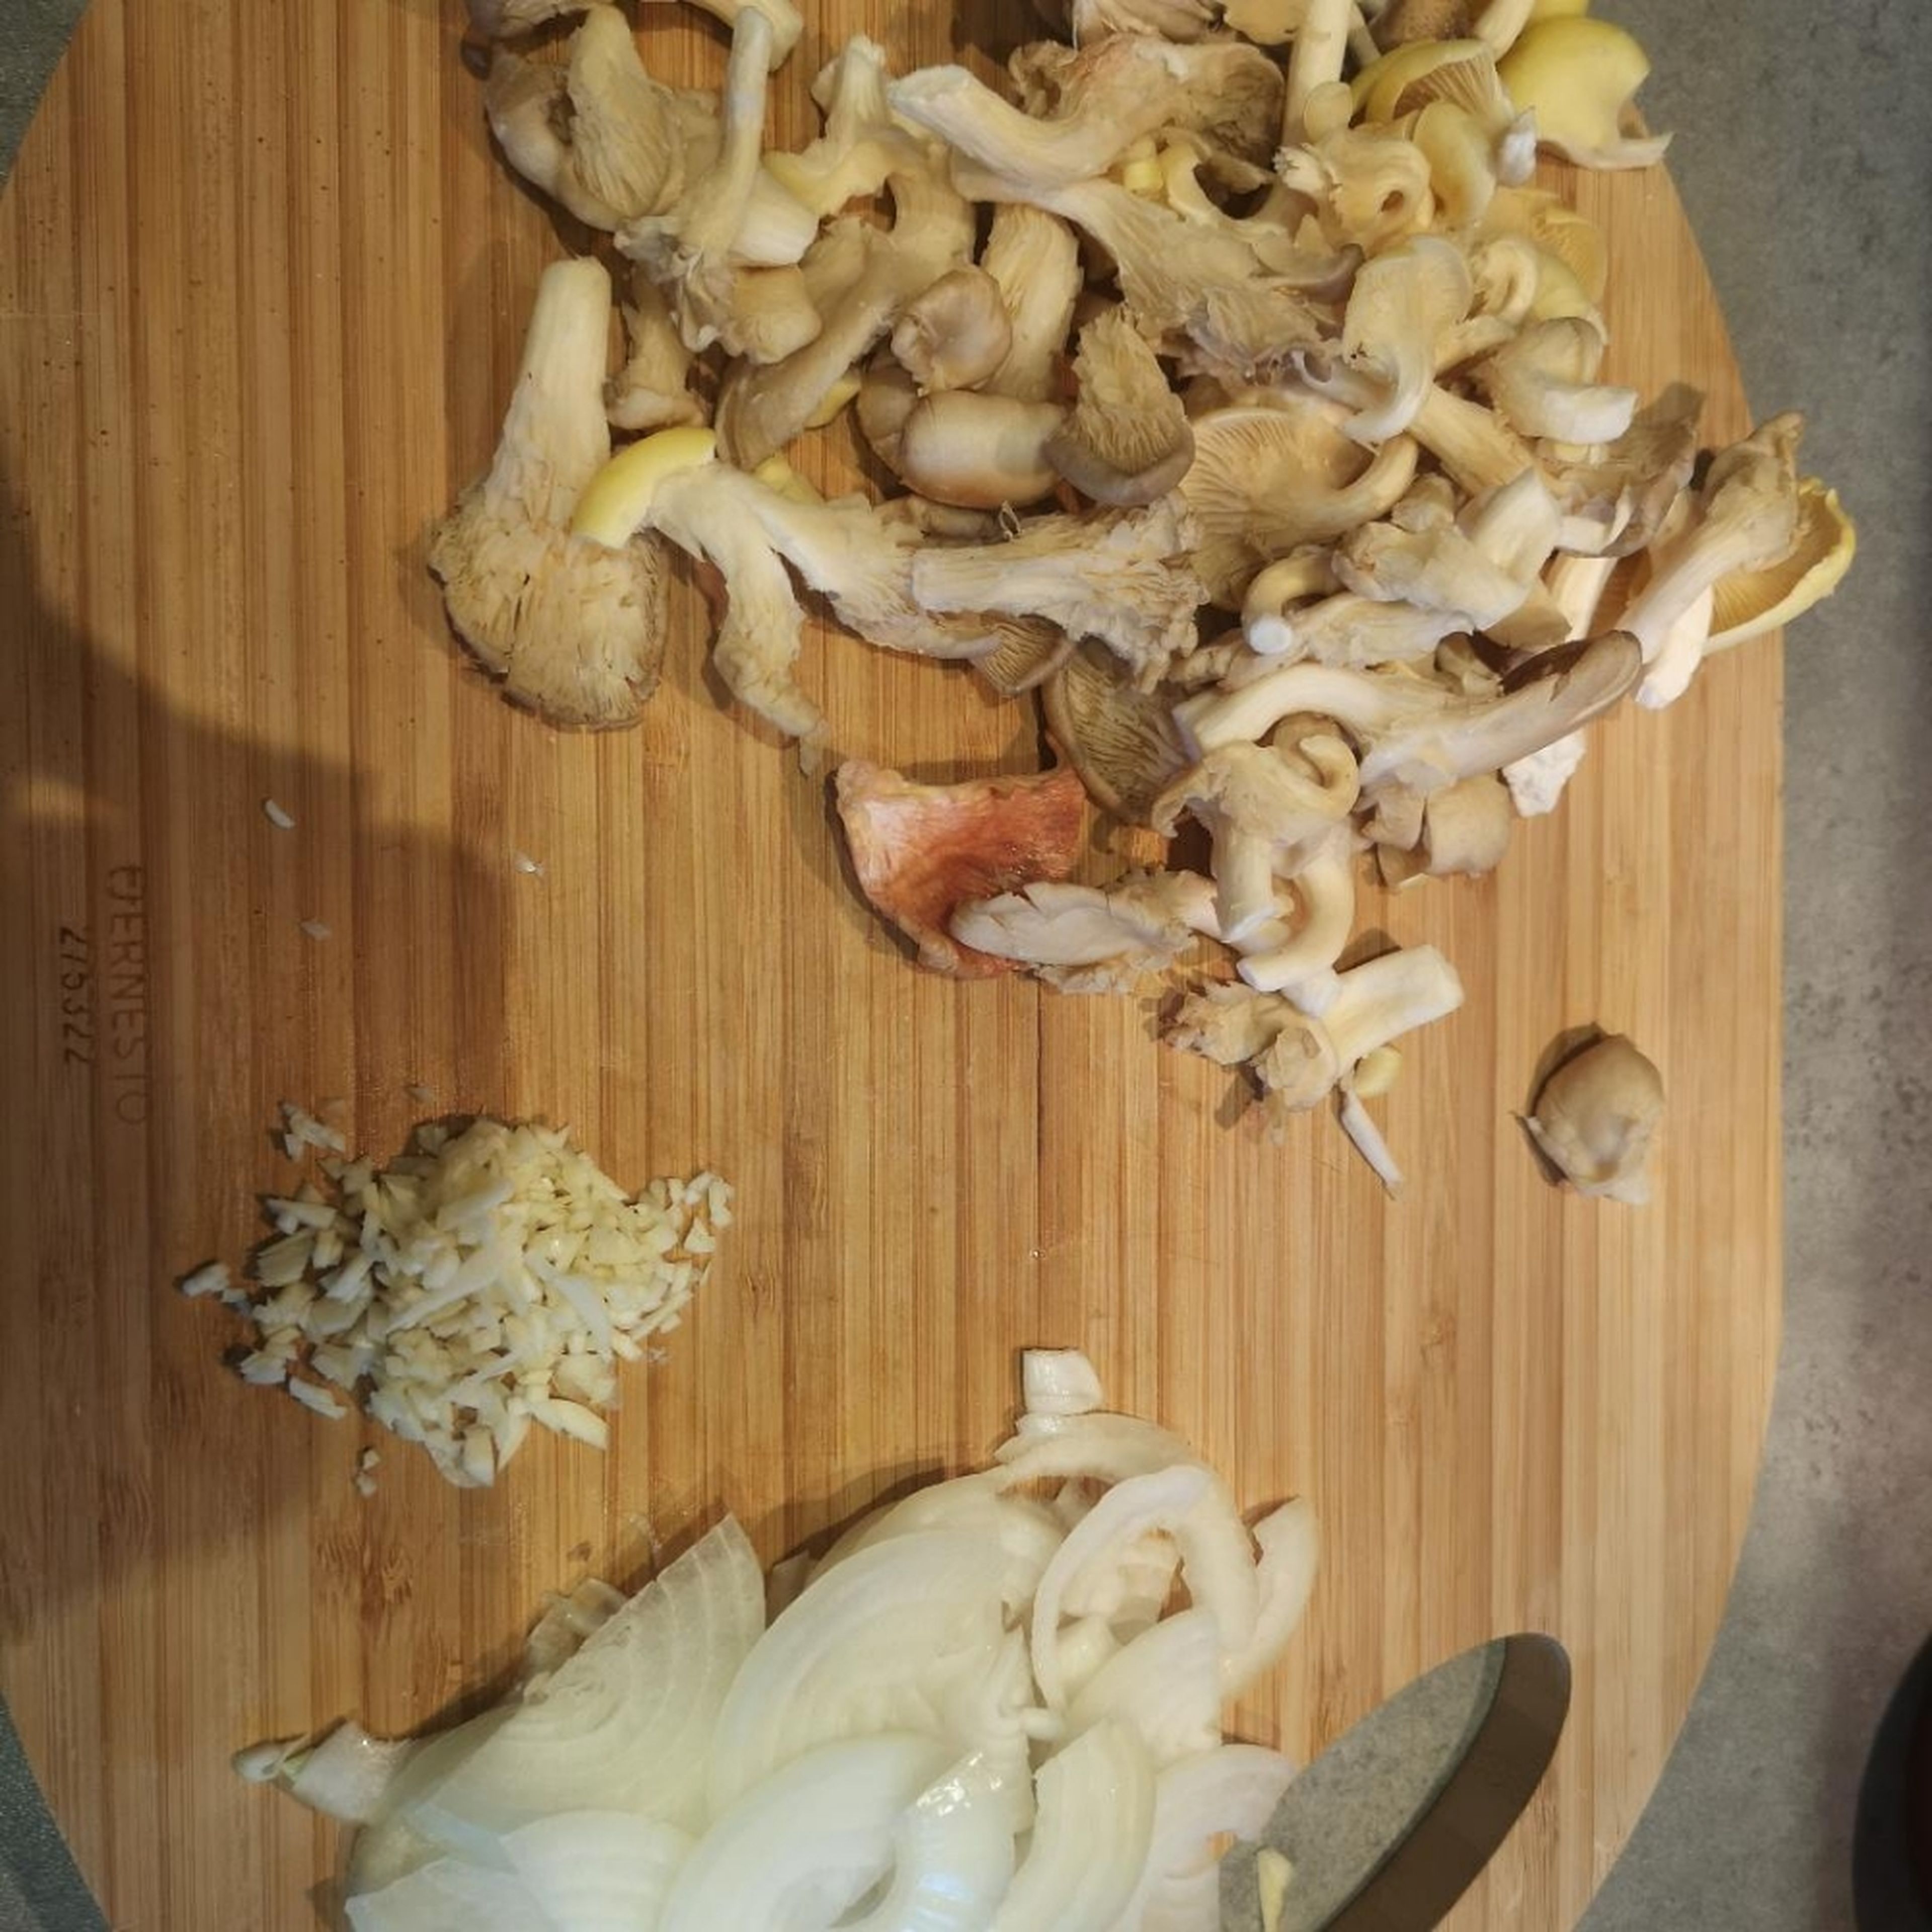 chop the garlic, slice the shallot and chop the mushrooms into equal size pieces